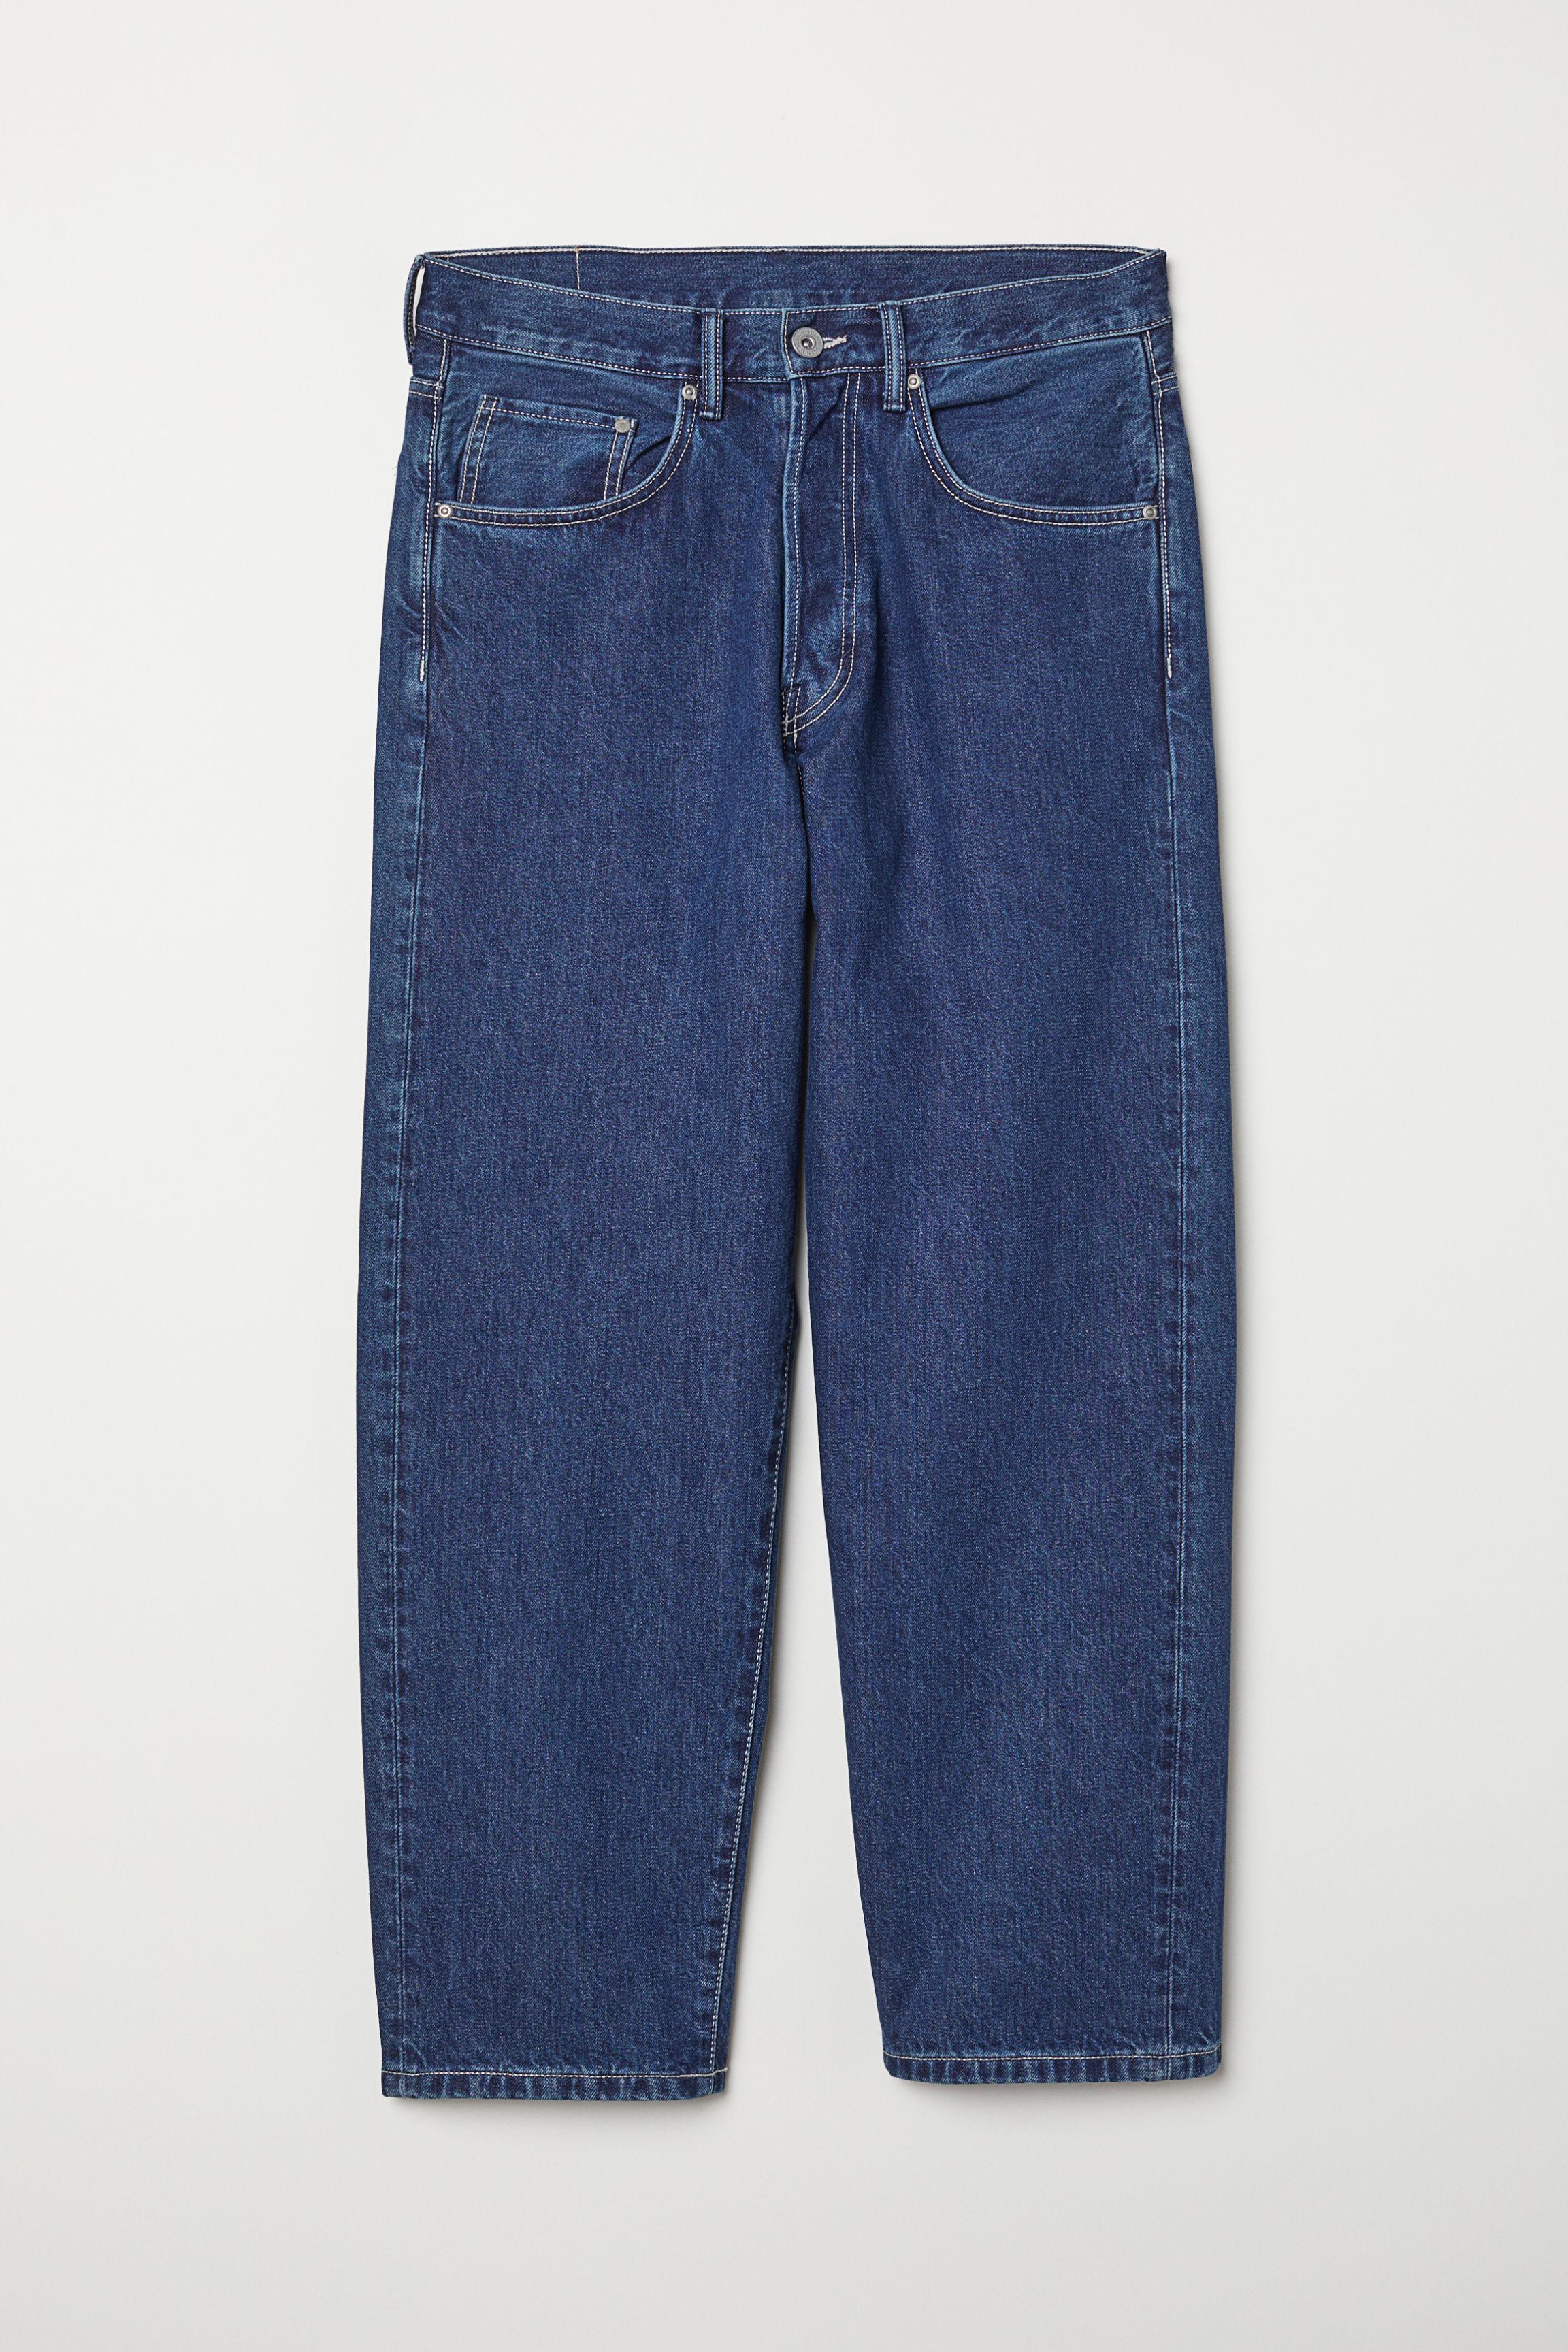 H&M Baggy Jeans in Blue for Men - Lyst